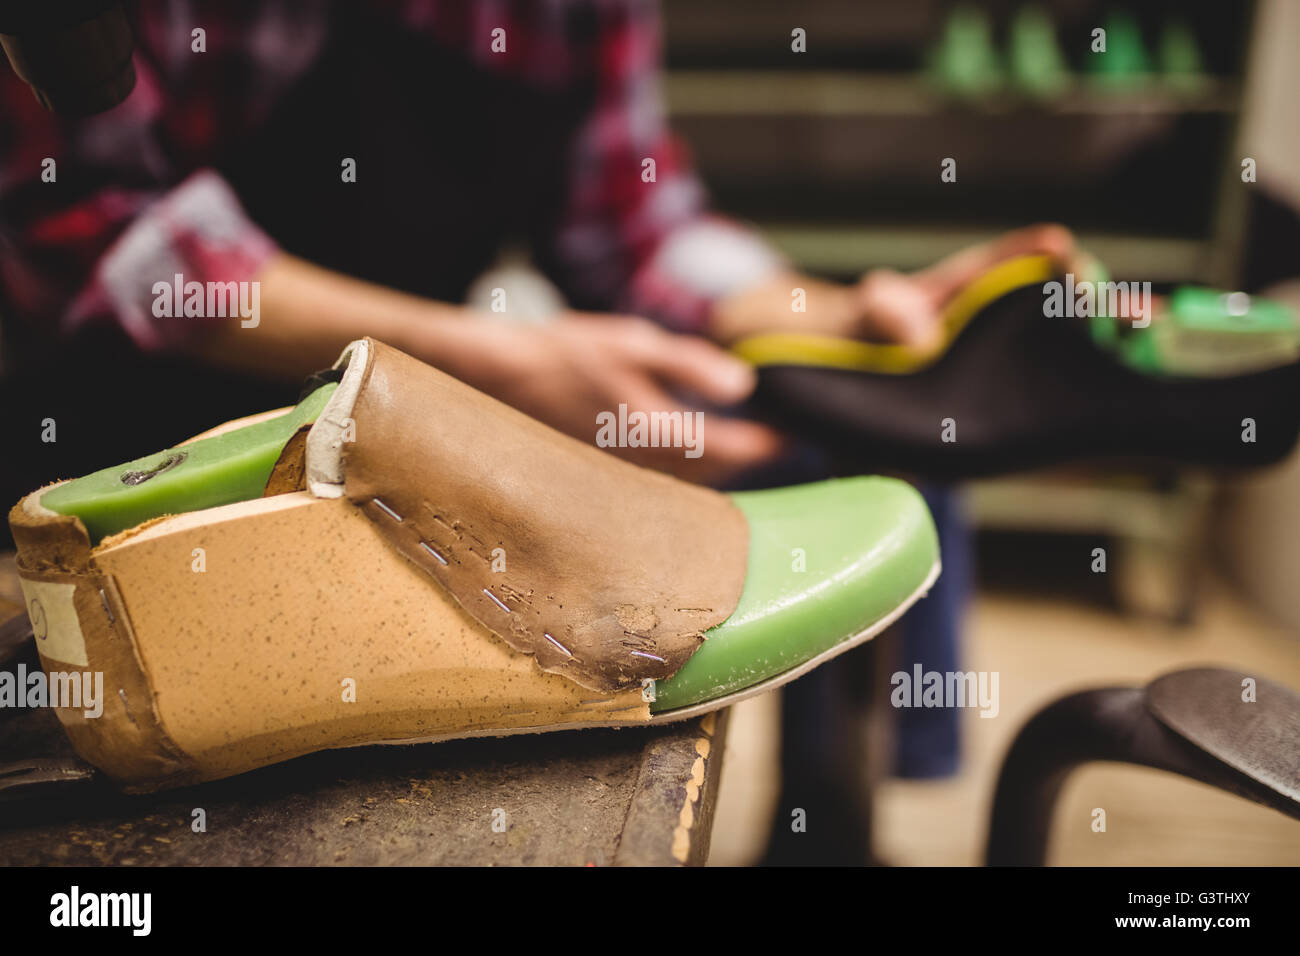 Focus on foreground of a pattern of shoes Stock Photo